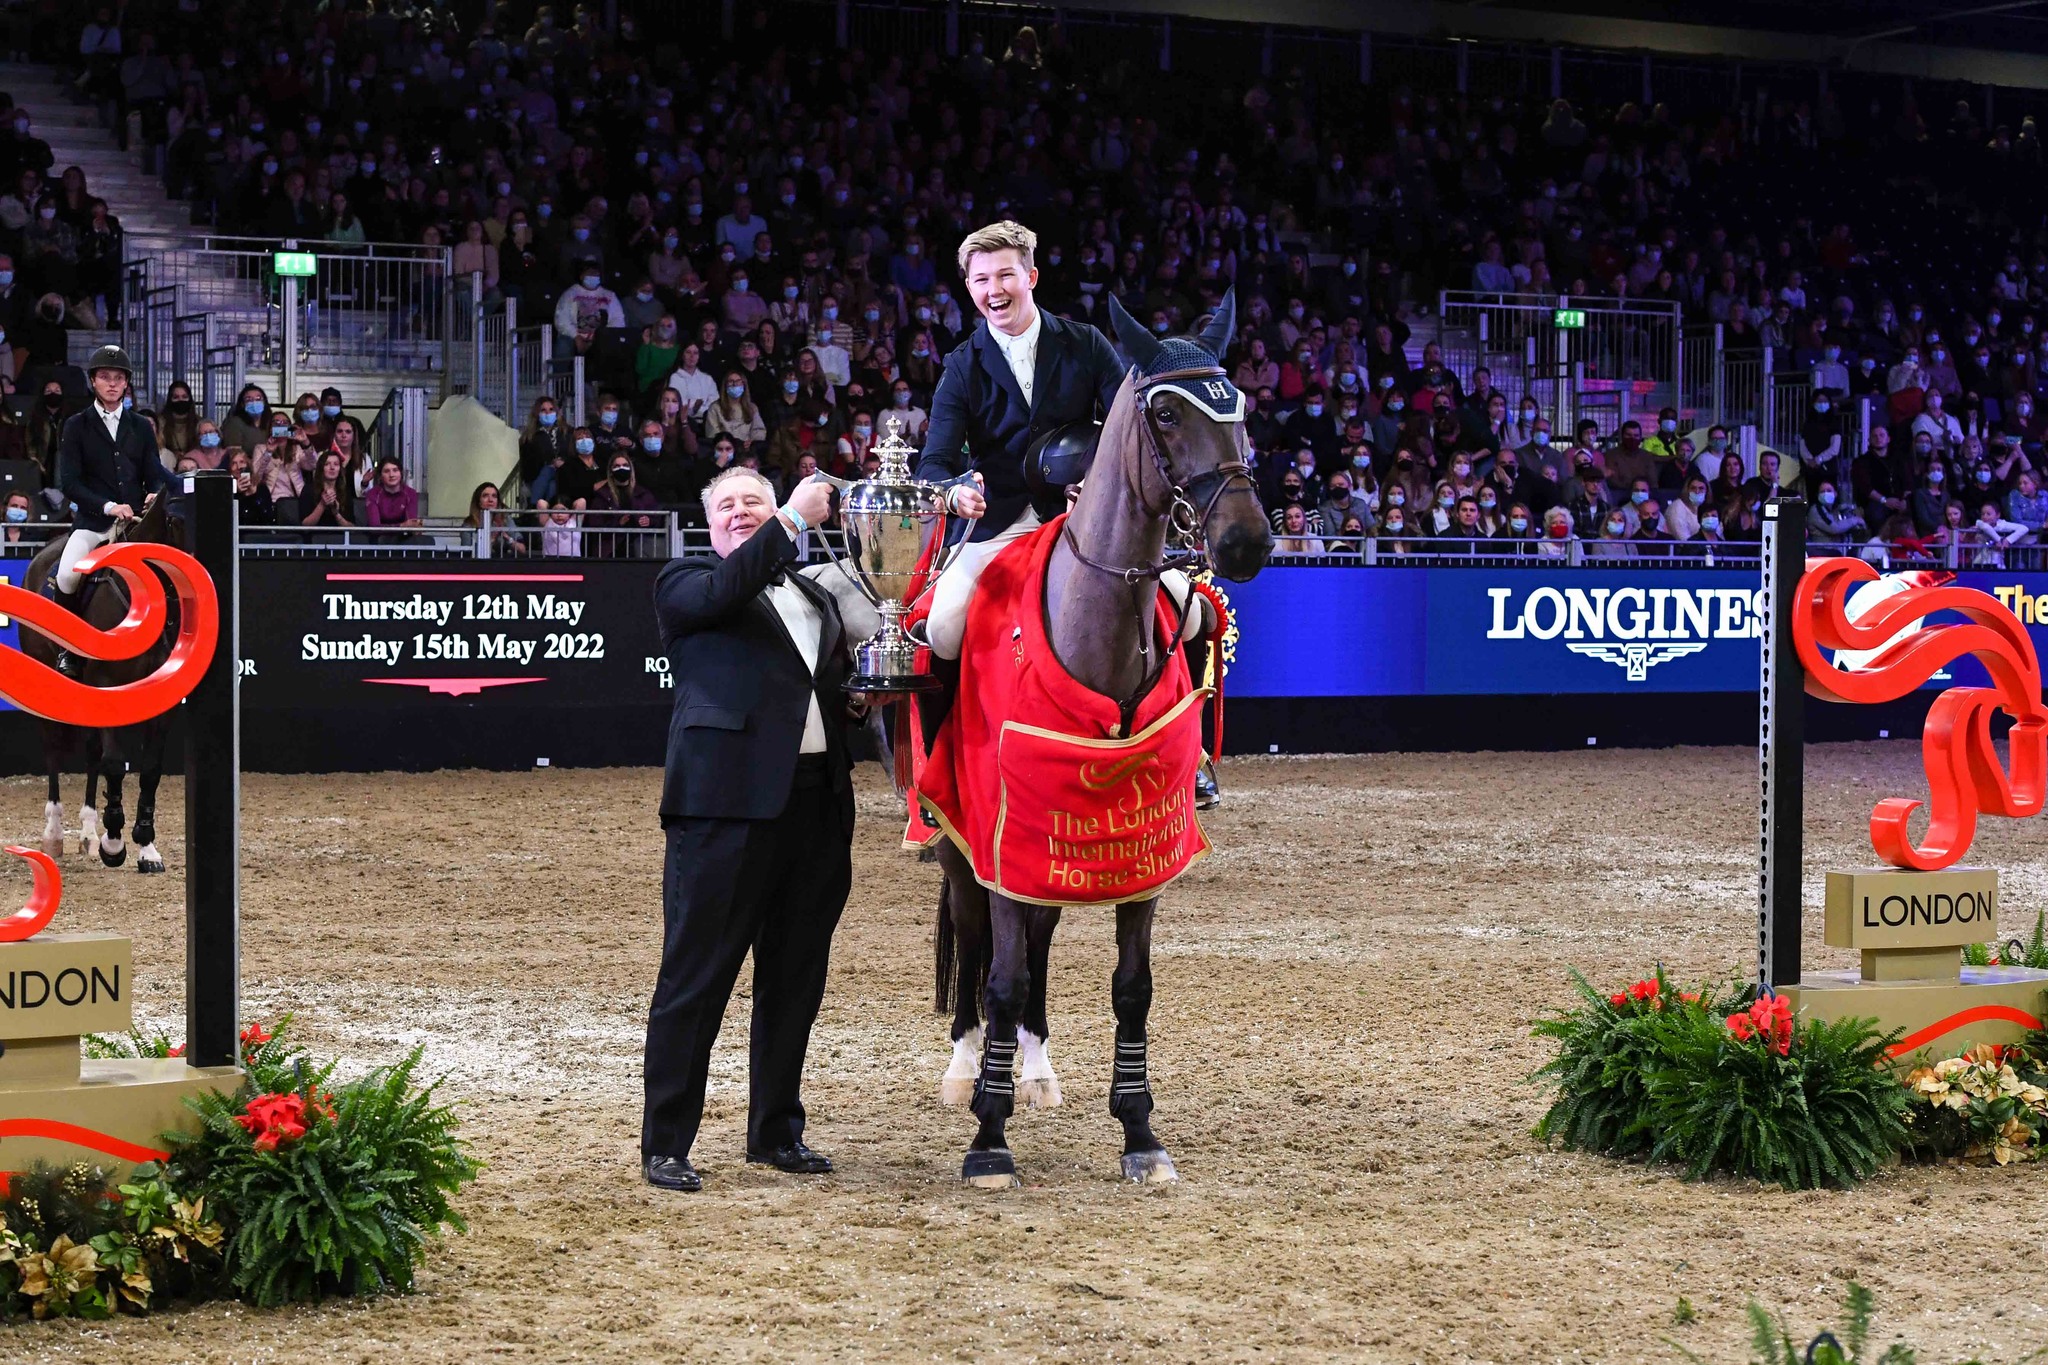 Looking ahead to the London International Horse Show with Harry Charles